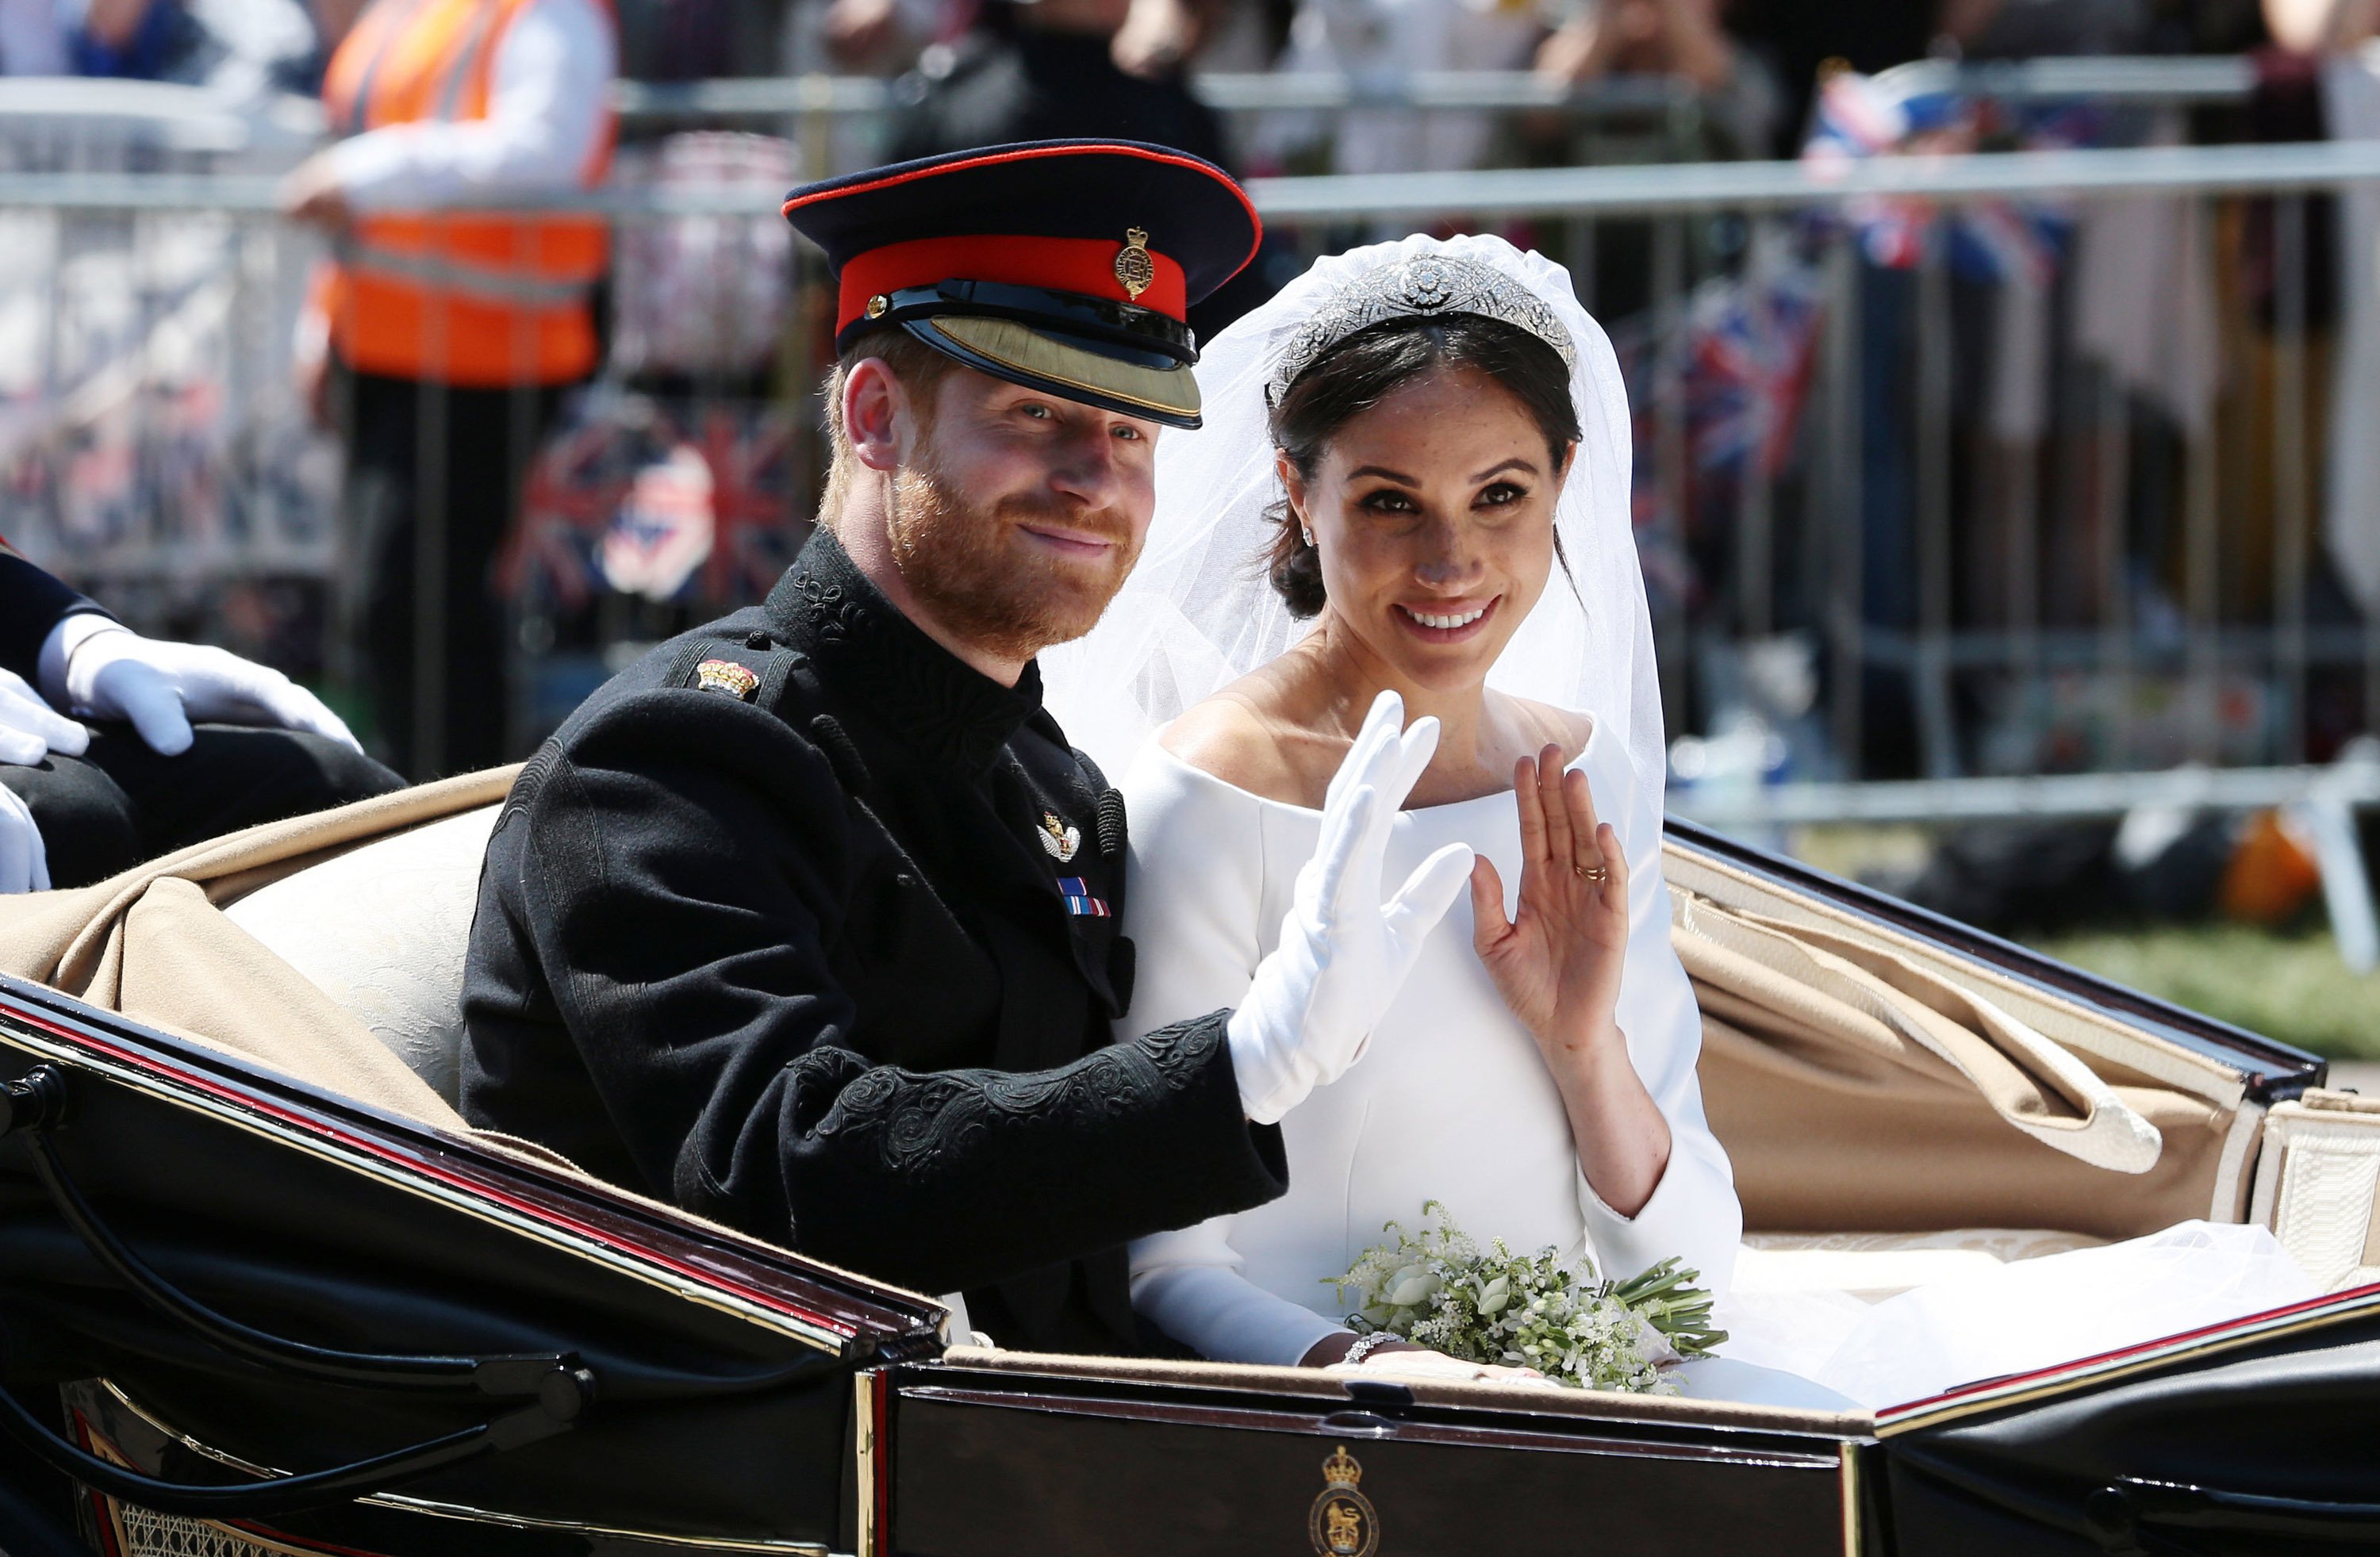 Prince Harry, Duke of Sussex and Meghan, Duchess of Sussex pictured waving from the Ascot Landau Carriage during their carriage procession on Castle Hill outside Windsor Castle in Windsor, on May 19, 2018. / Source: Getty Images